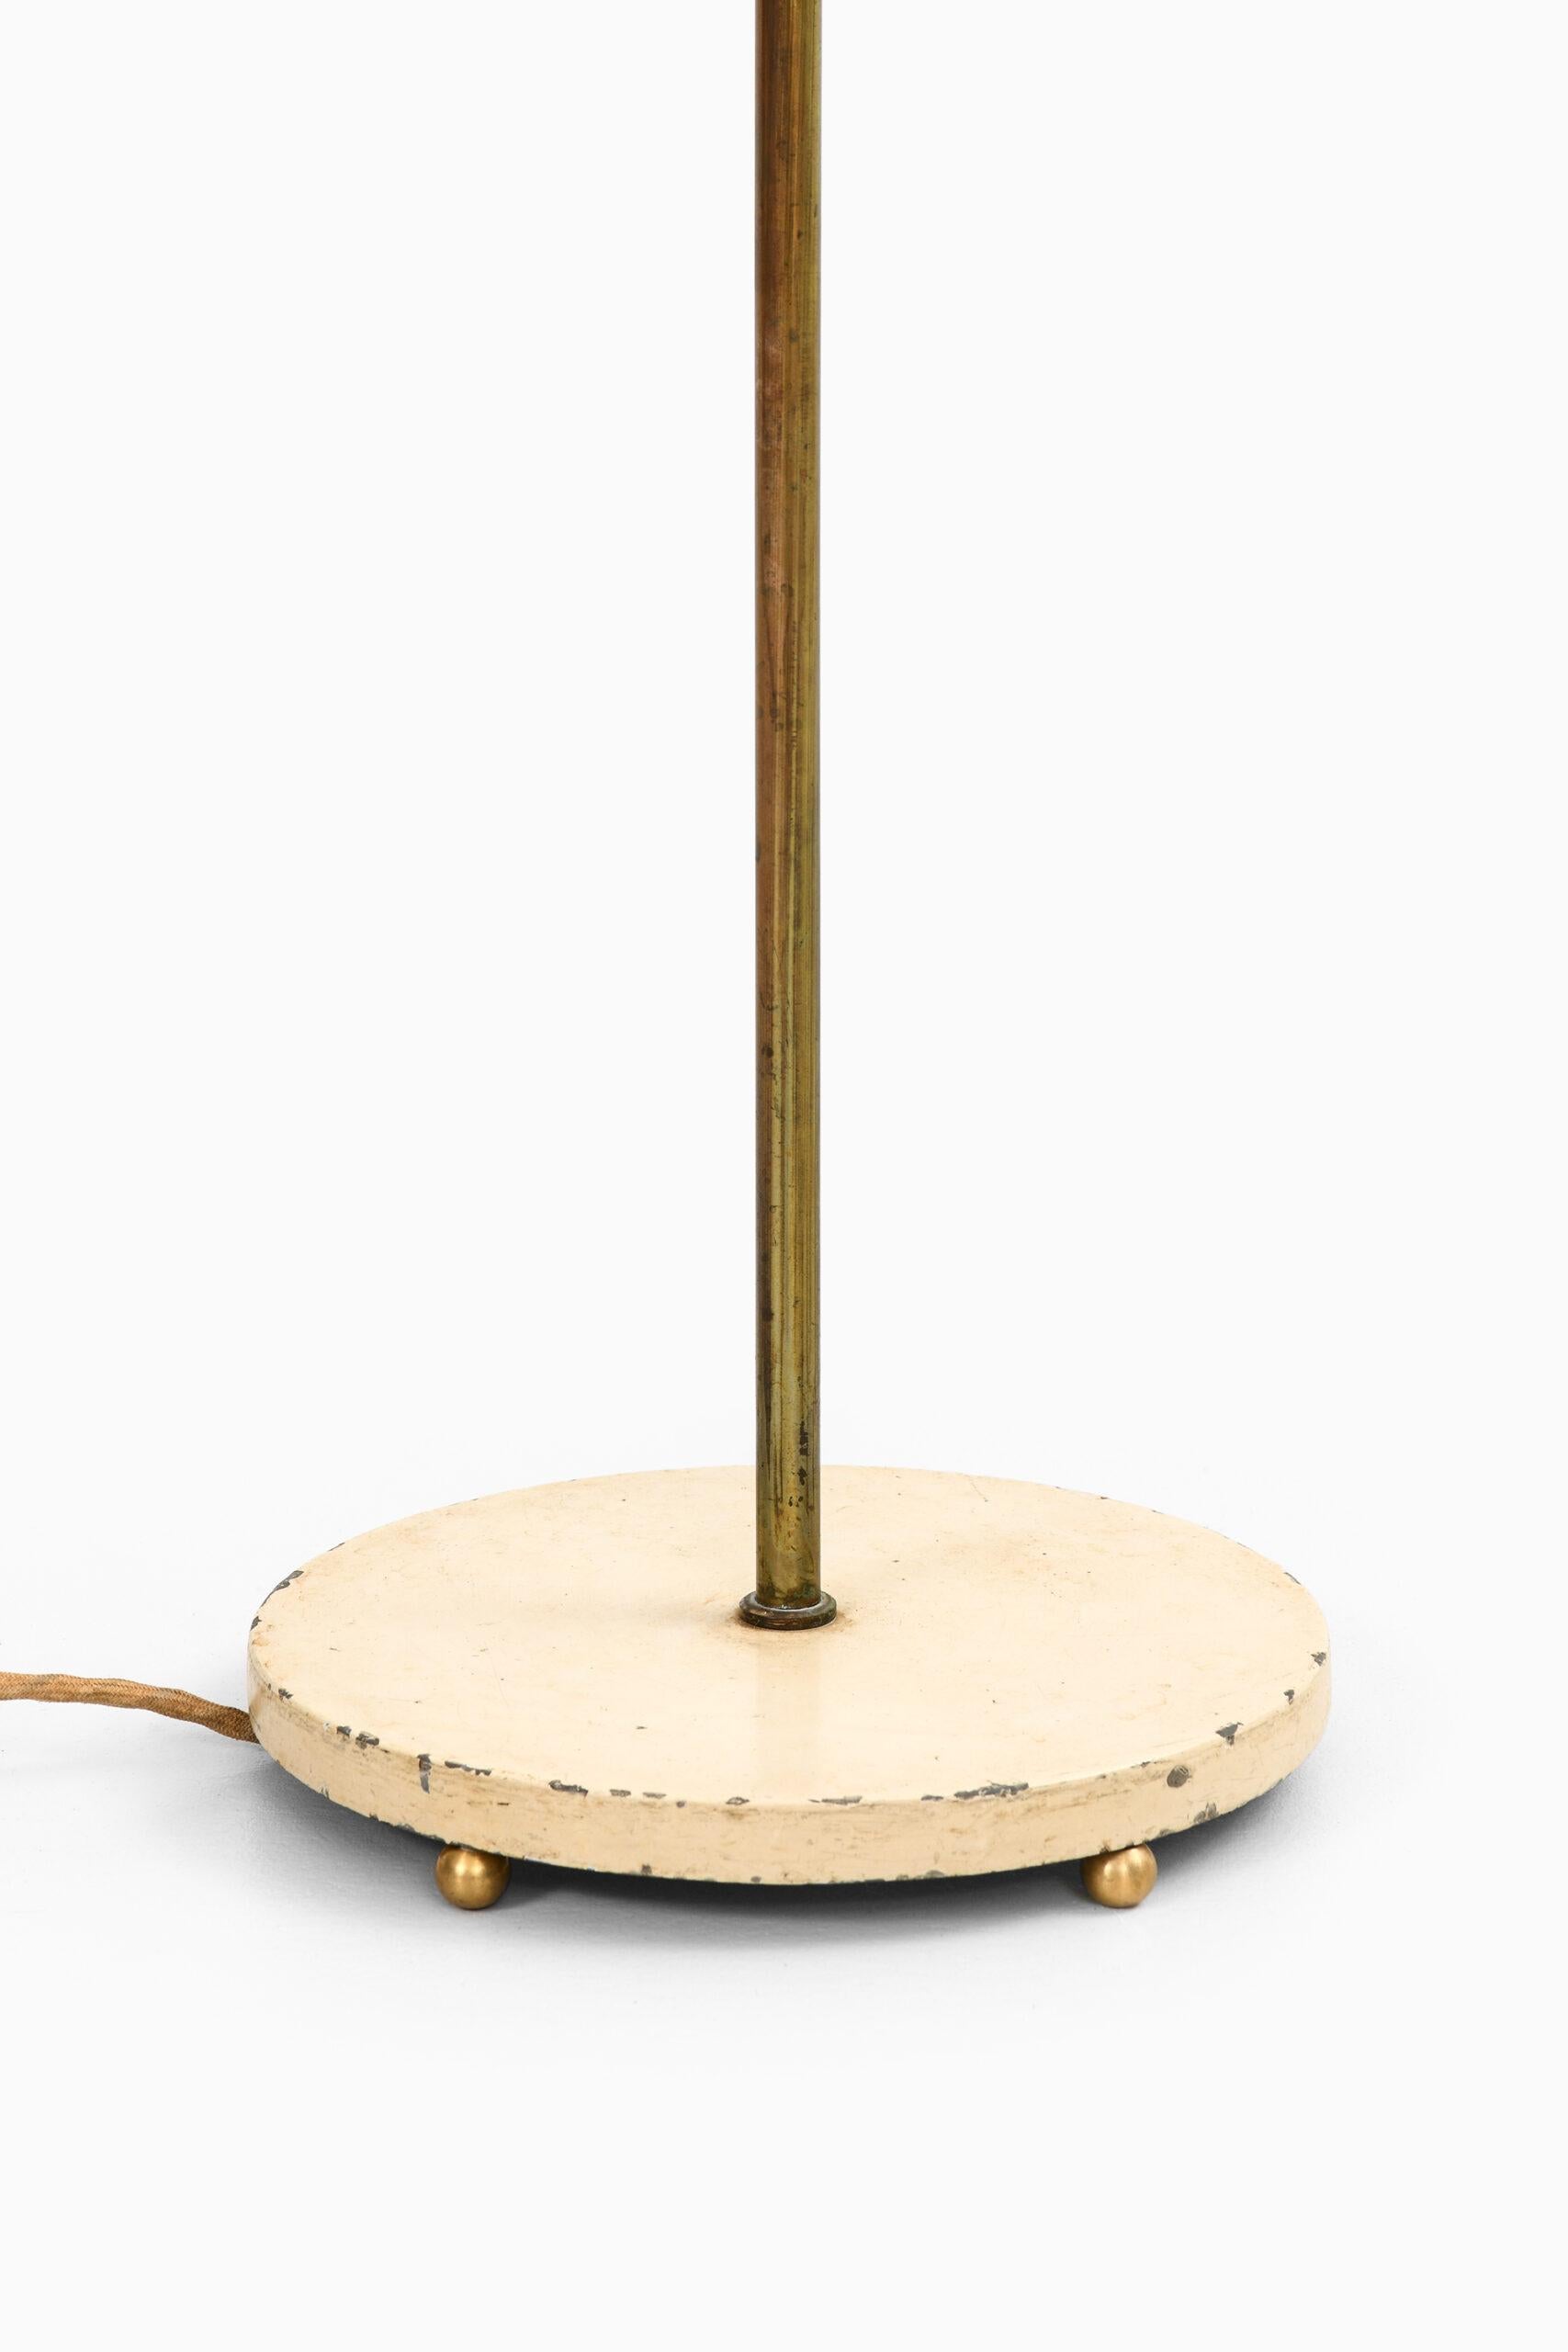 Very rare early floor lamp designed by Arne Jacobsen. Produced by Louis Poulsen in Denmark.